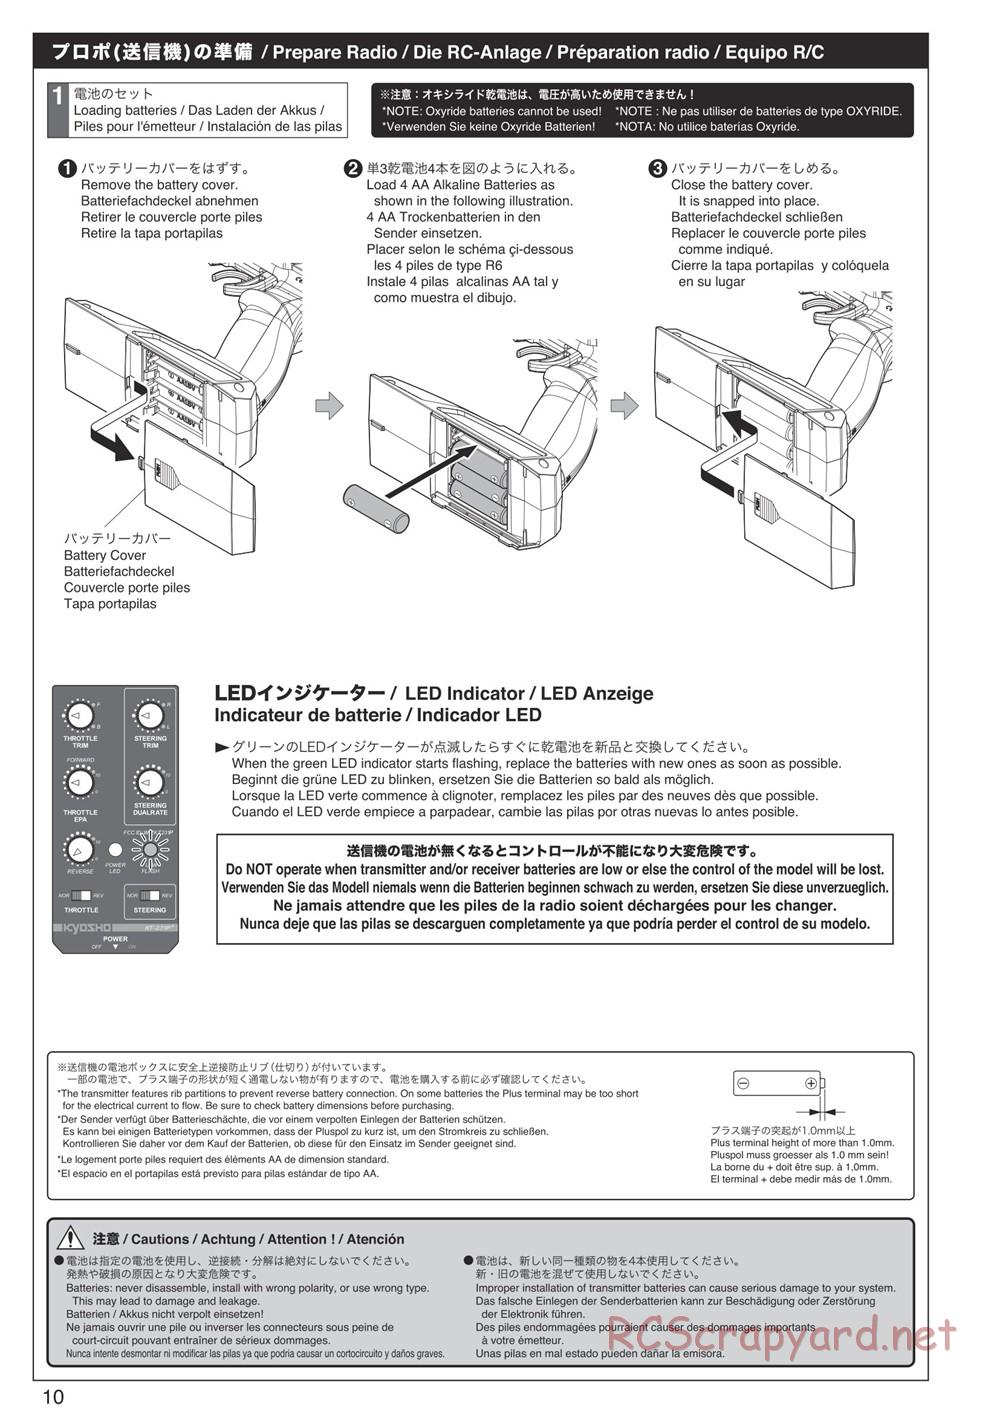 Kyosho - Inferno Neo ST 3.0 - Manual - Page 10